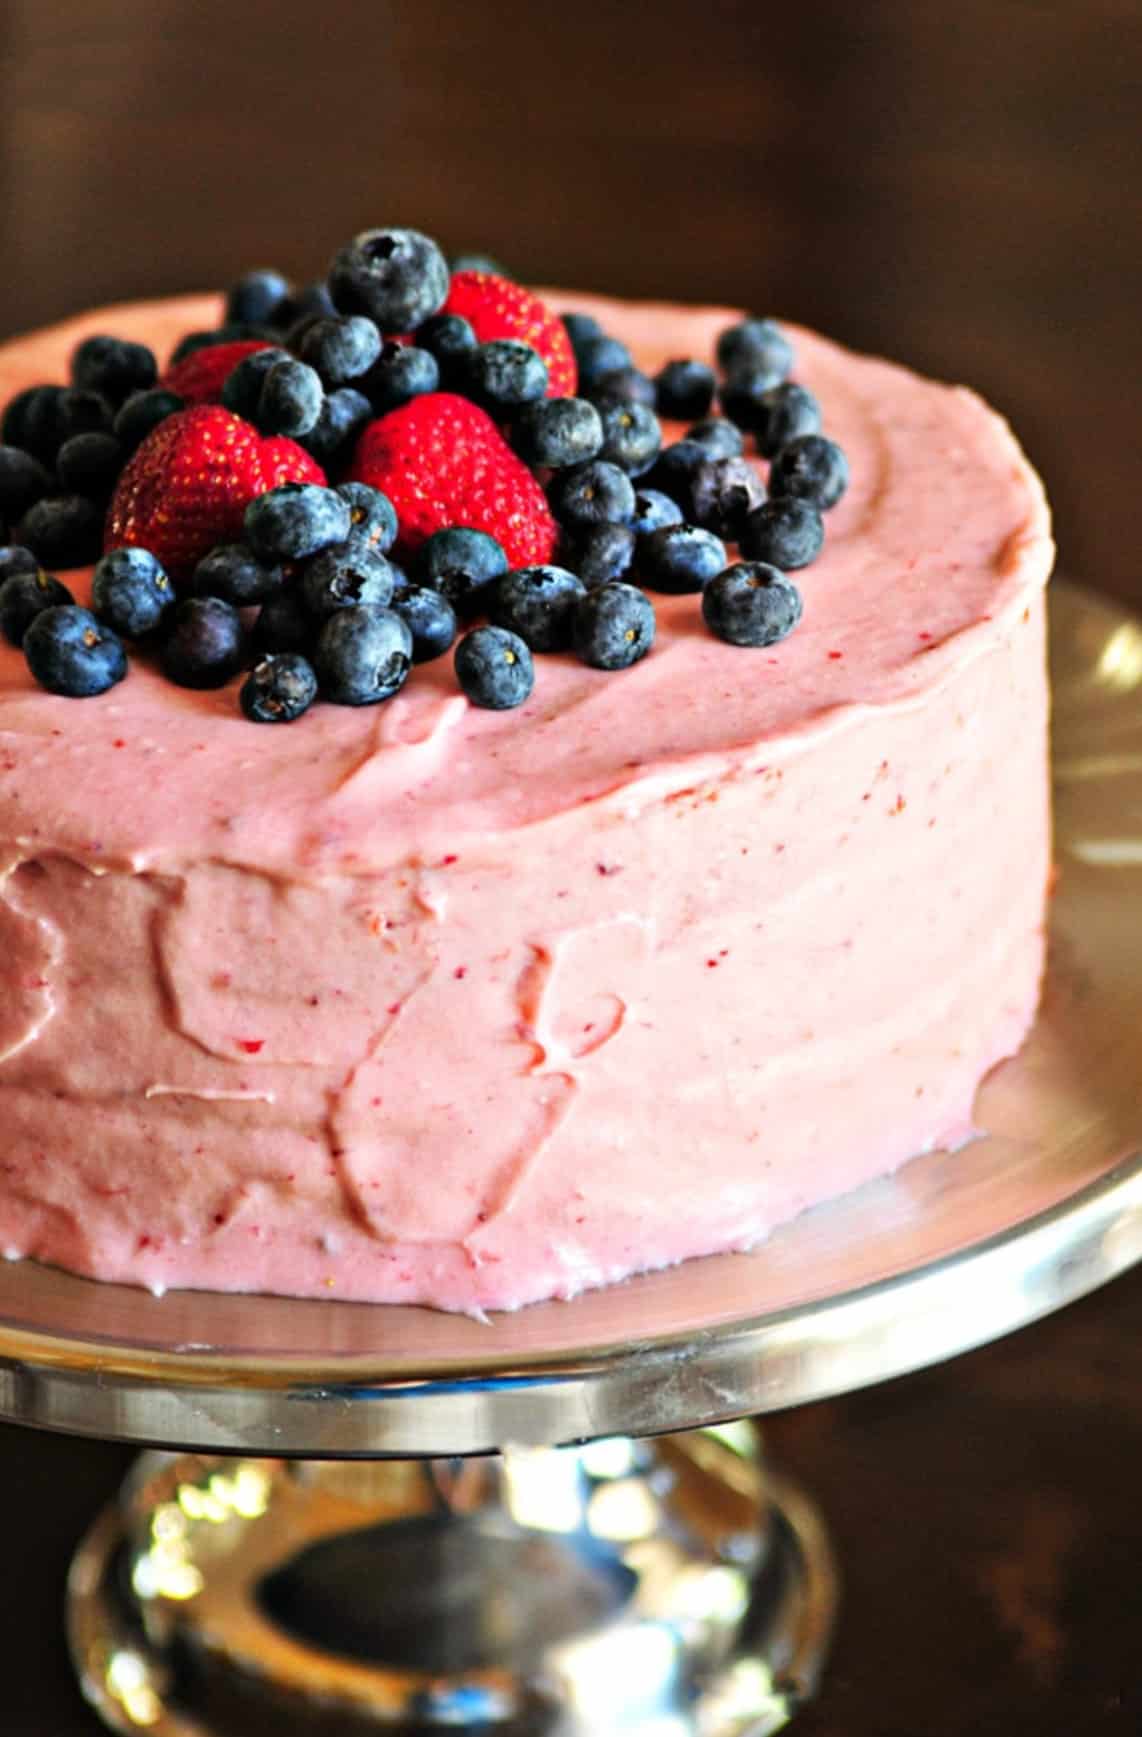 Strawberry cake with strawberry buttercream frosting on a silver cake stand topped with fresh blueberries and strawberries